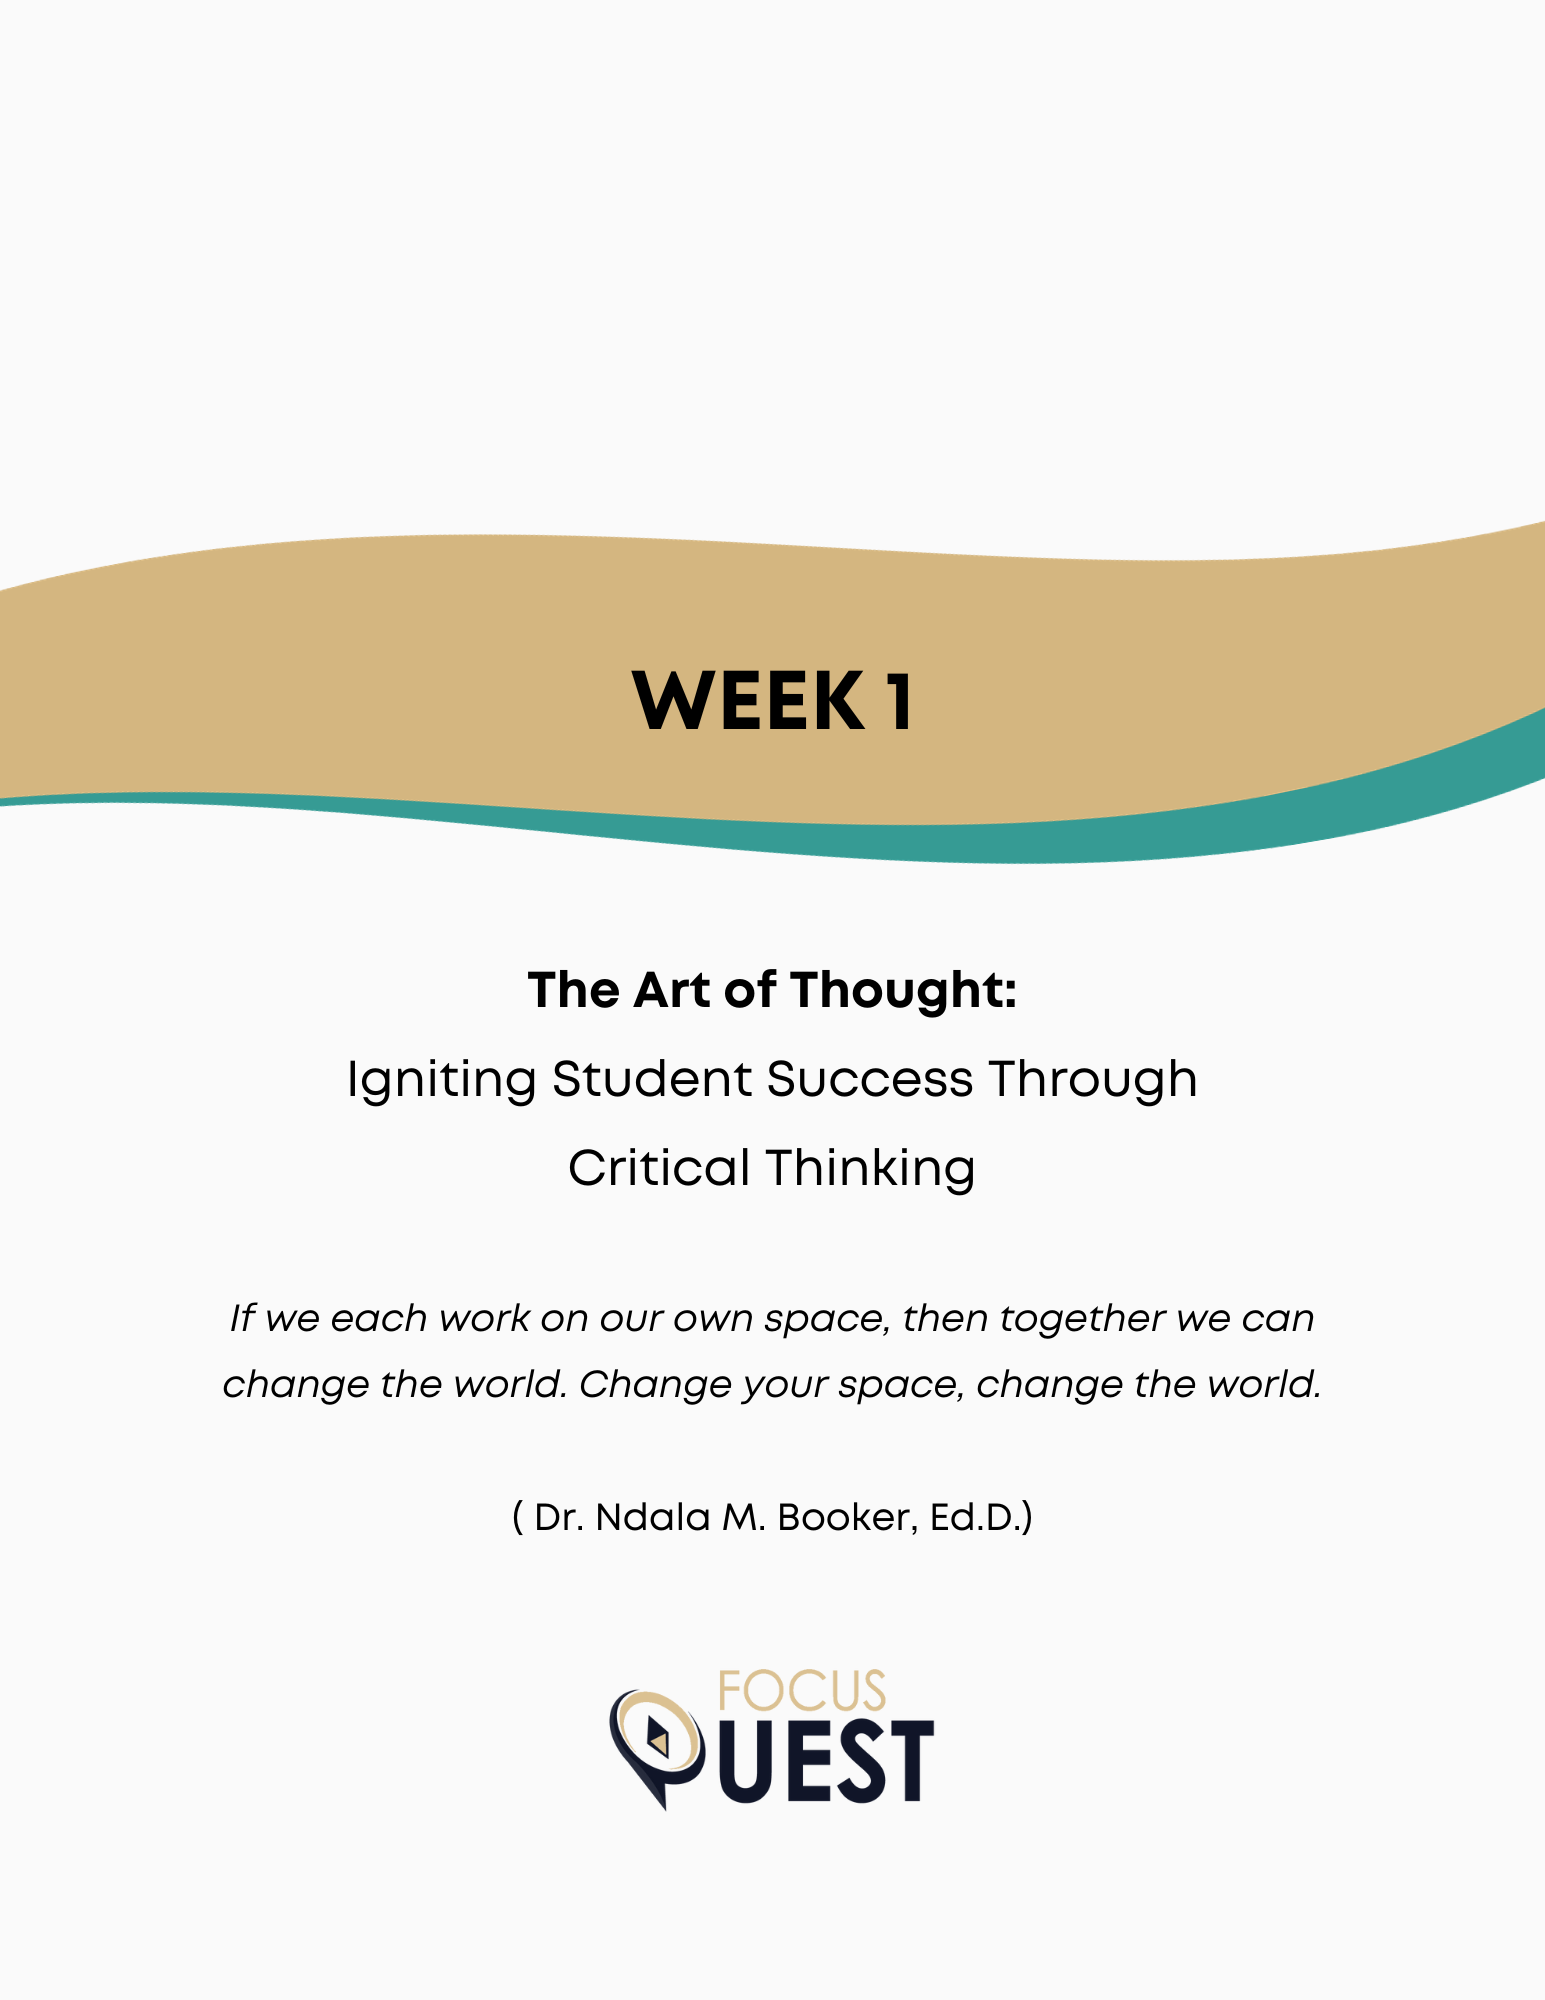 FocusQuest - Quest for Success Week 1 - The Art of Thought: Igniting Student Success Through Critical Thinking